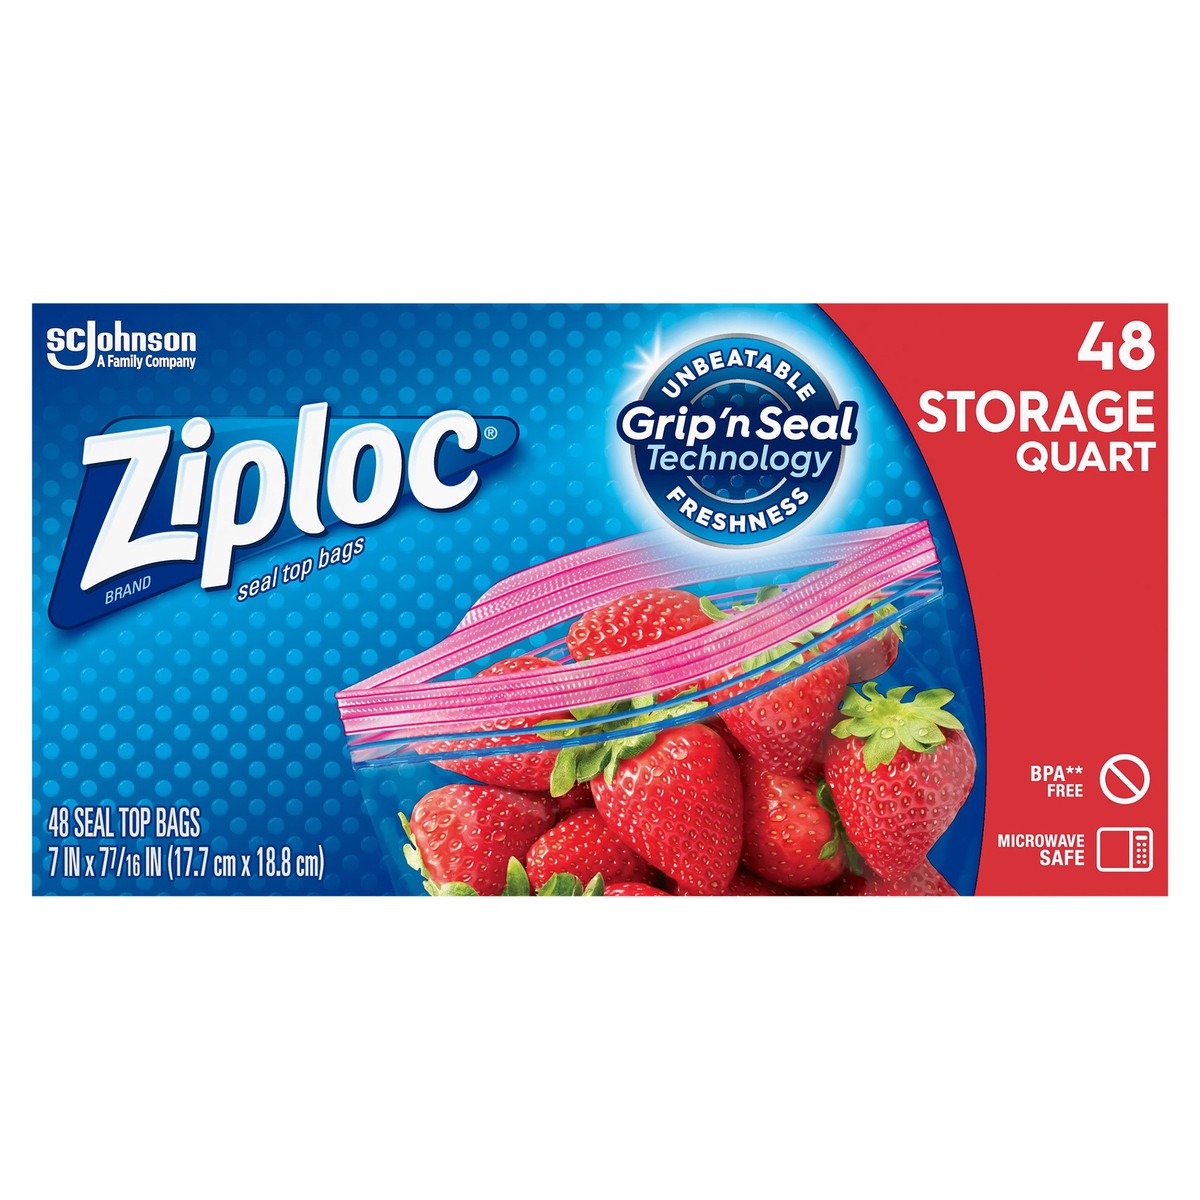 slide 1 of 4, Ziploc Brand Storage Bags with New Stay Open Design, Quart, 48 Count, Patented Stand-up Bottom, Easy to Fill Food Storage Bags, Unloc a Free Set of Hands in the Kitchen, Microwave Safe, BPA Free, 